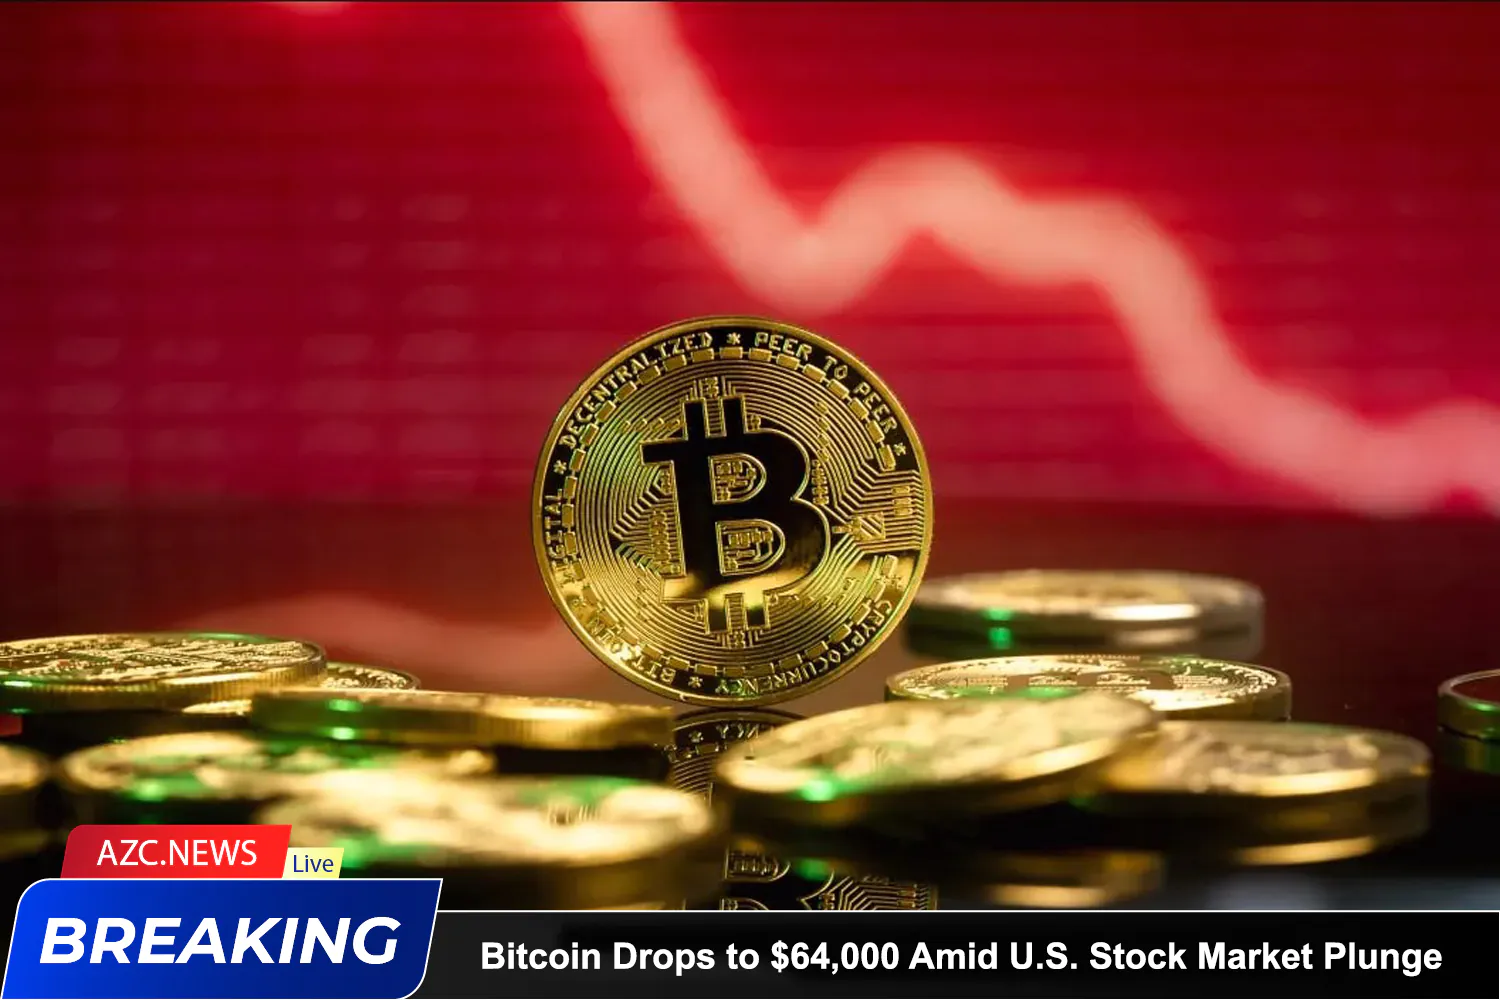 Azcnews Bitcoin Drops To $64,000 Amid Us Stock Market Plunge